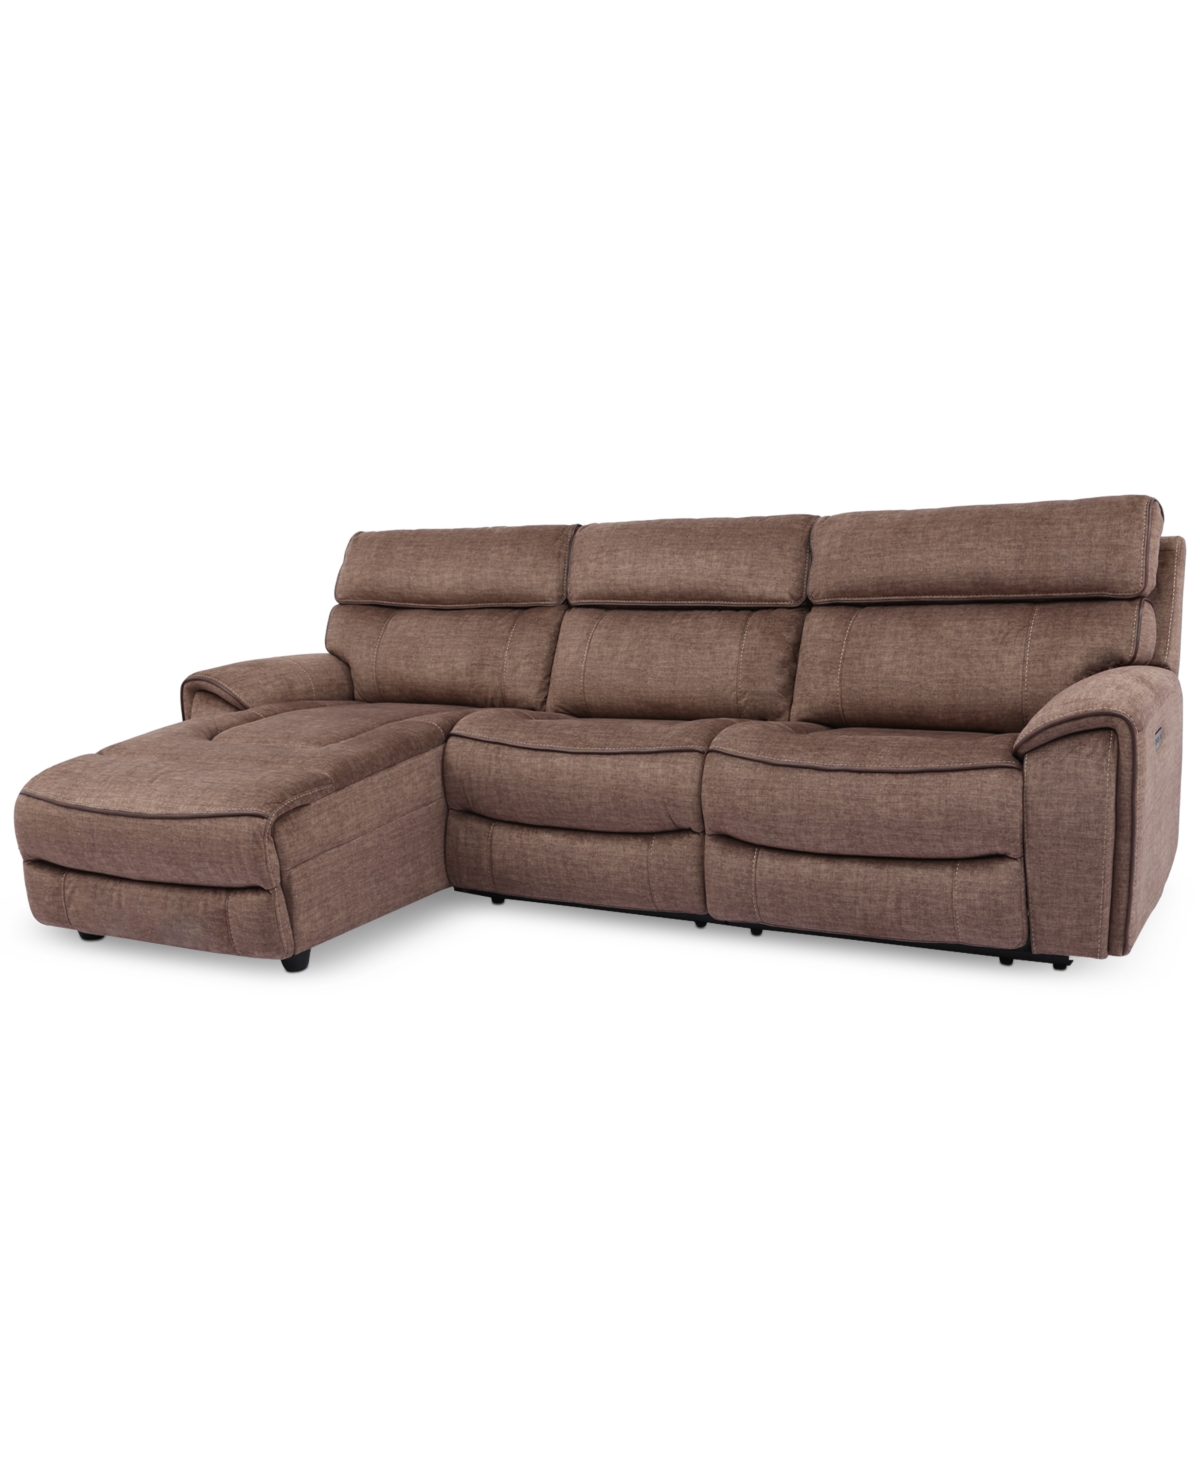 Furniture Hutchenson 3-pc. Fabric Chaise Sectional With Power Recliner And Power Headrest In Chocolate Brown